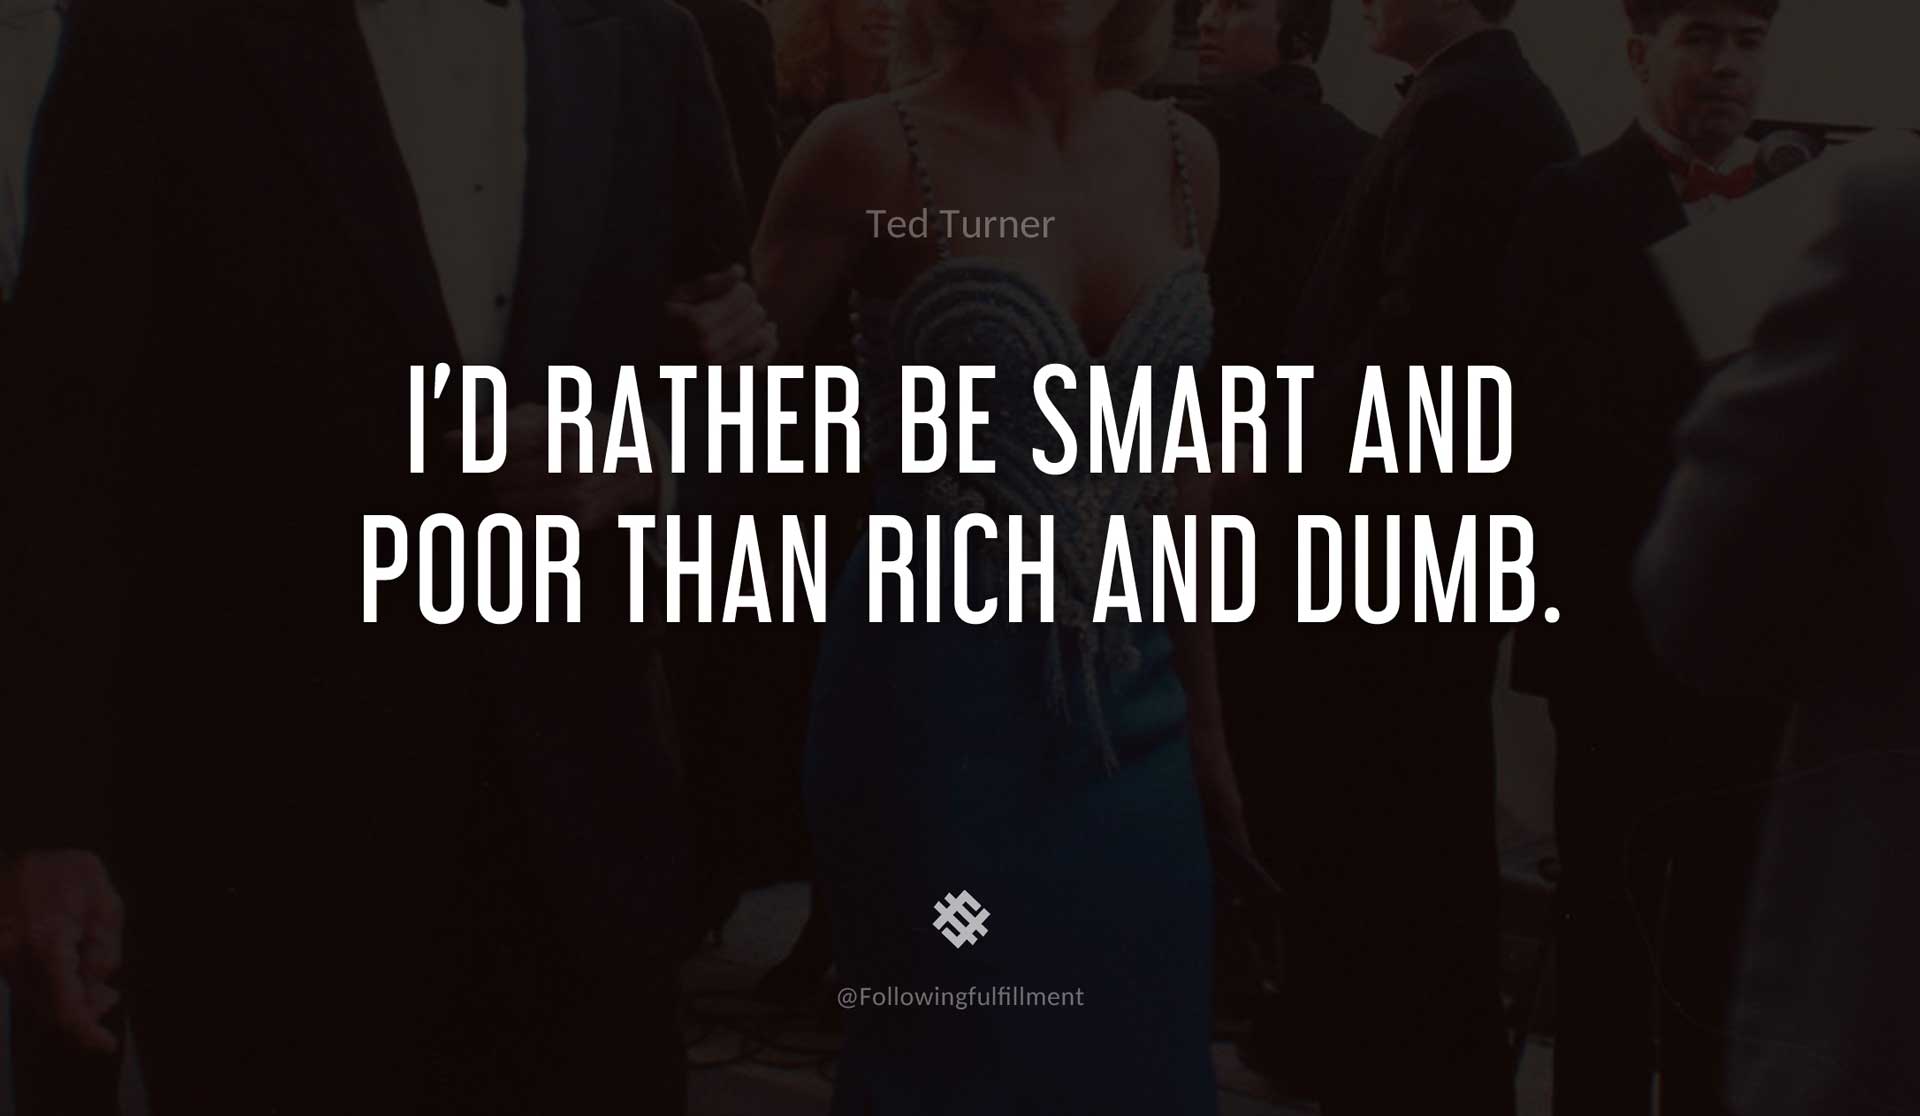 I'd-rather-be-smart-and-poor-than-rich-and-dumb.-TED-TURNER-Quote.jpg